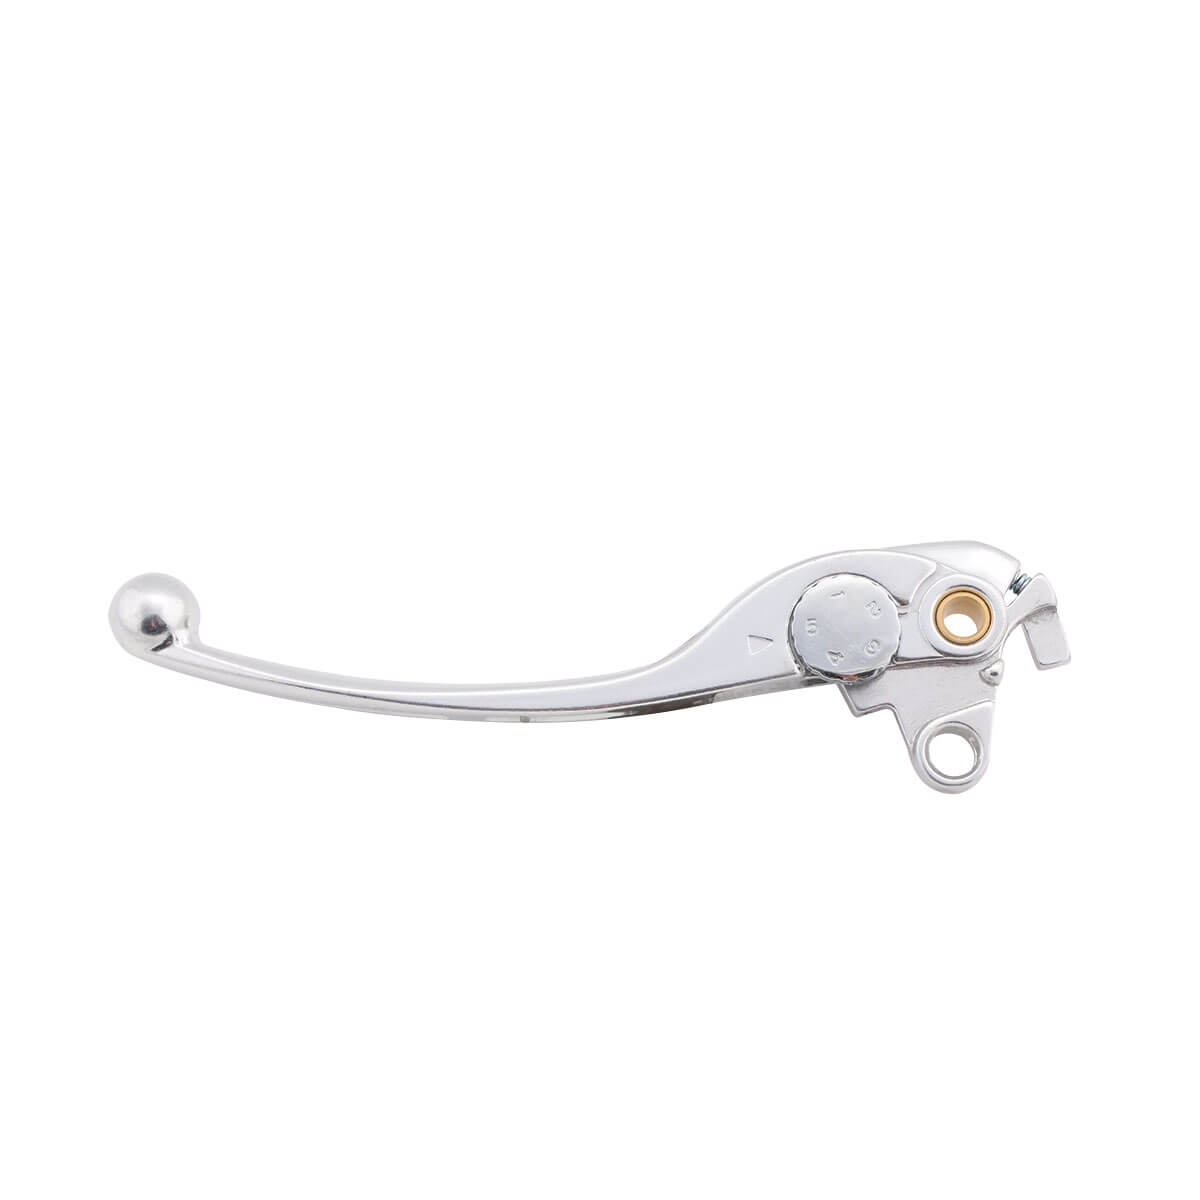 shin_yo Repair clutch lever with ABE, 5-fold adjustable, type BC 133, silver